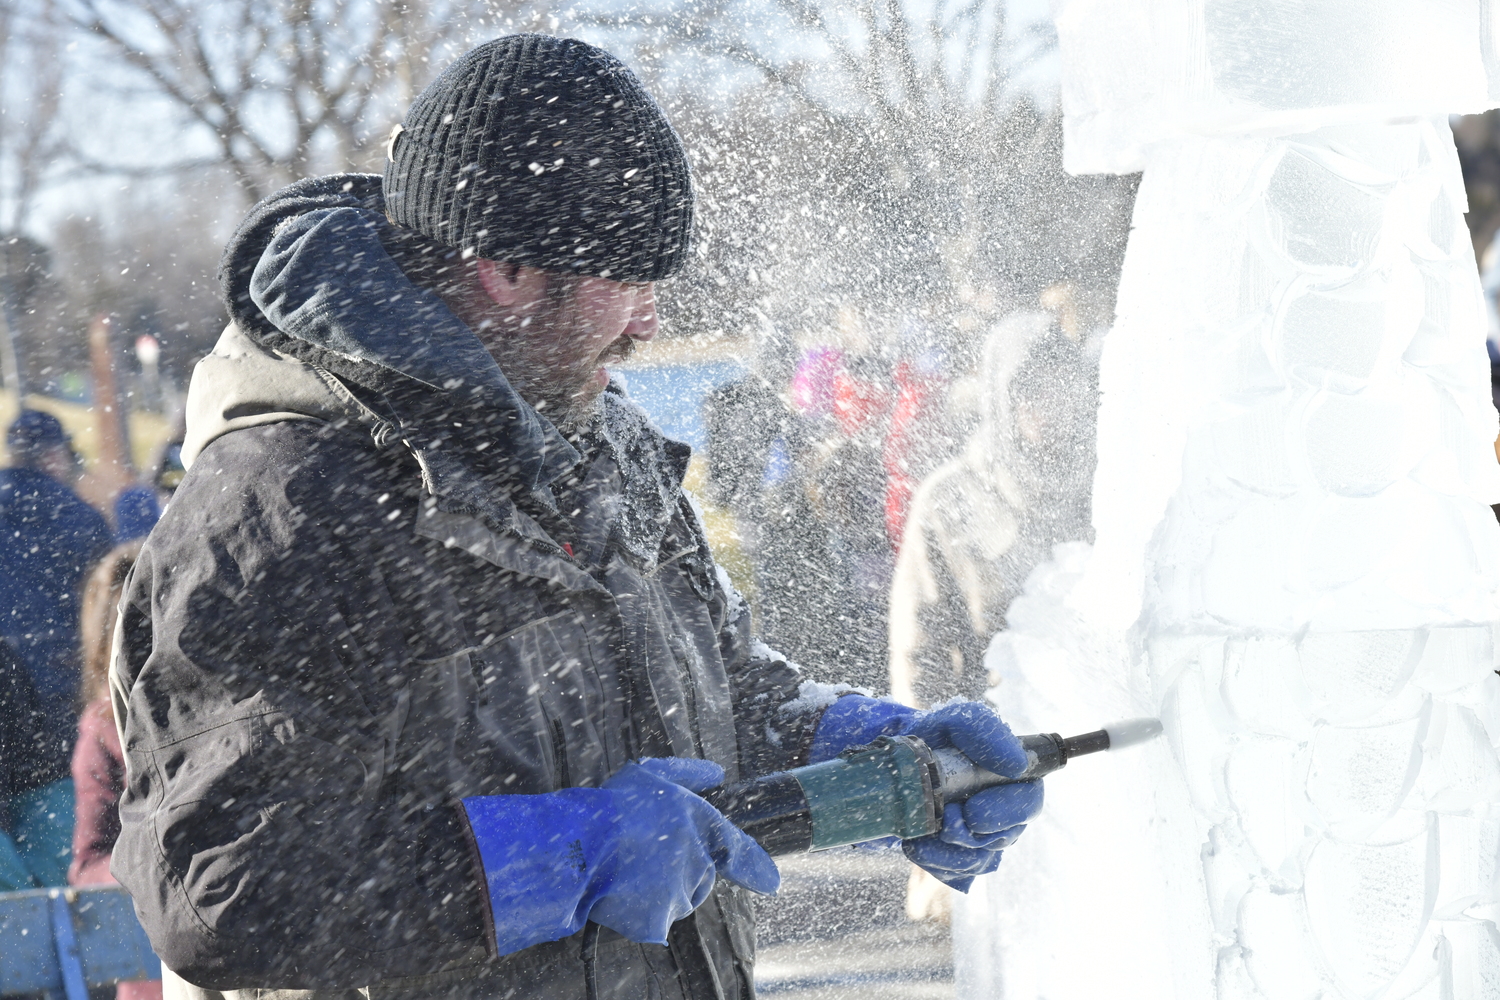 Richard Daly works on an ice sculpture on Long Wharf on Saturday.